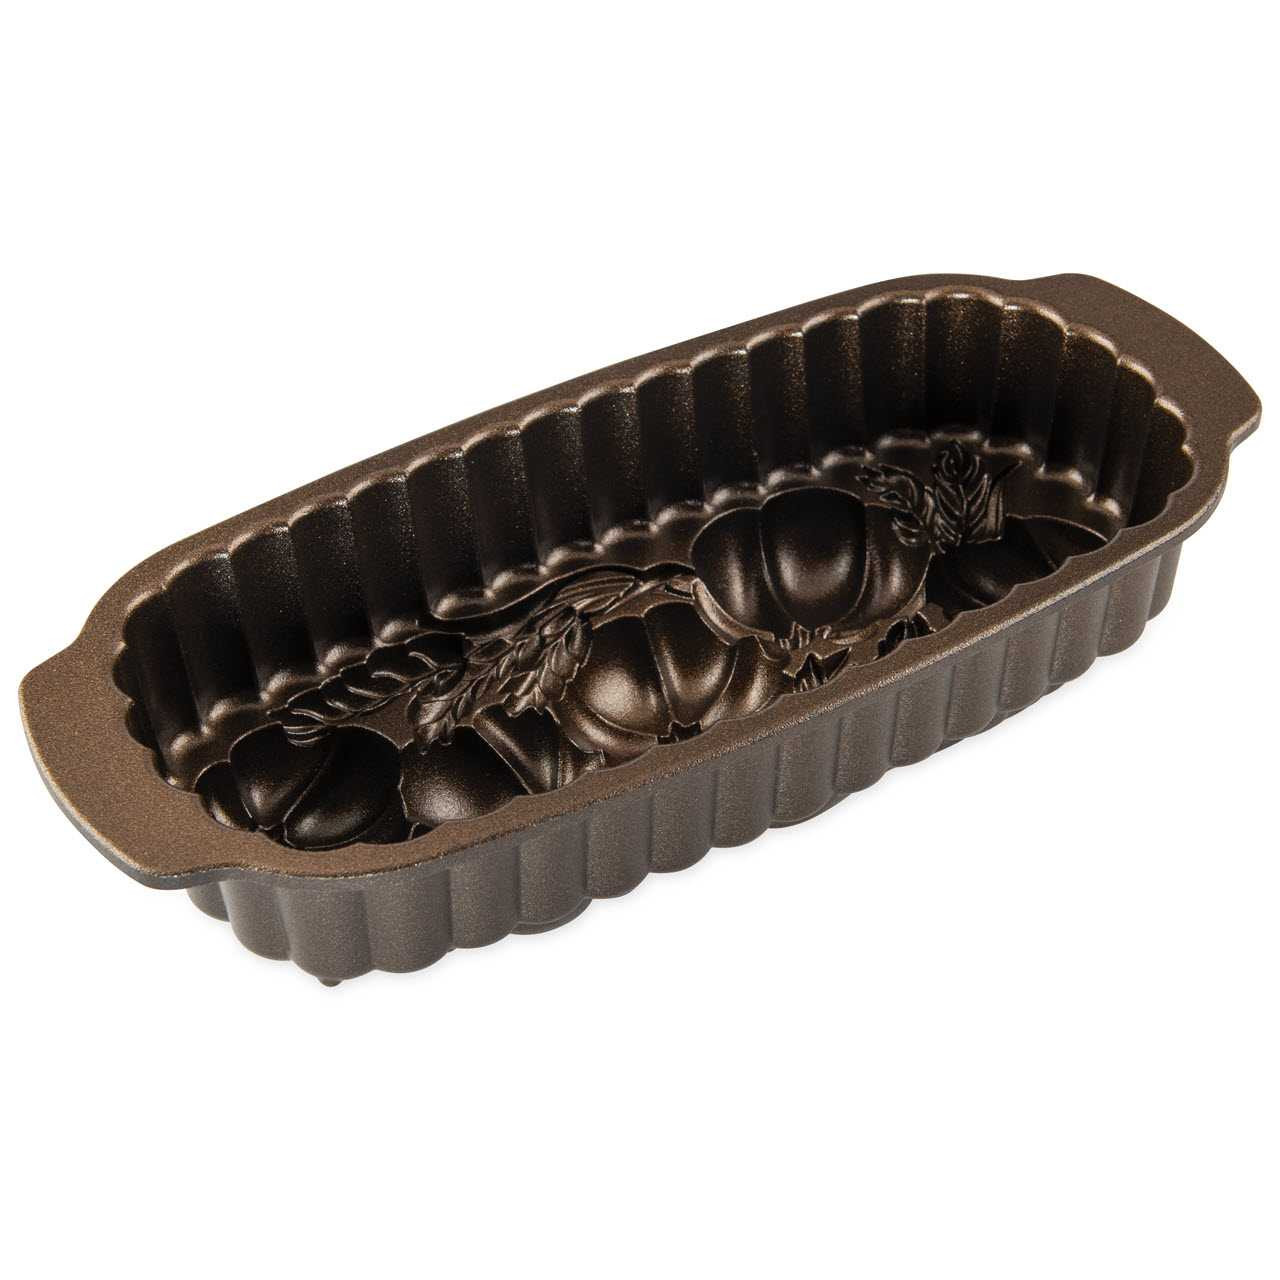 Nordic Ware's Autumnal Loaf Pan Will Make Any Cake Look Like a